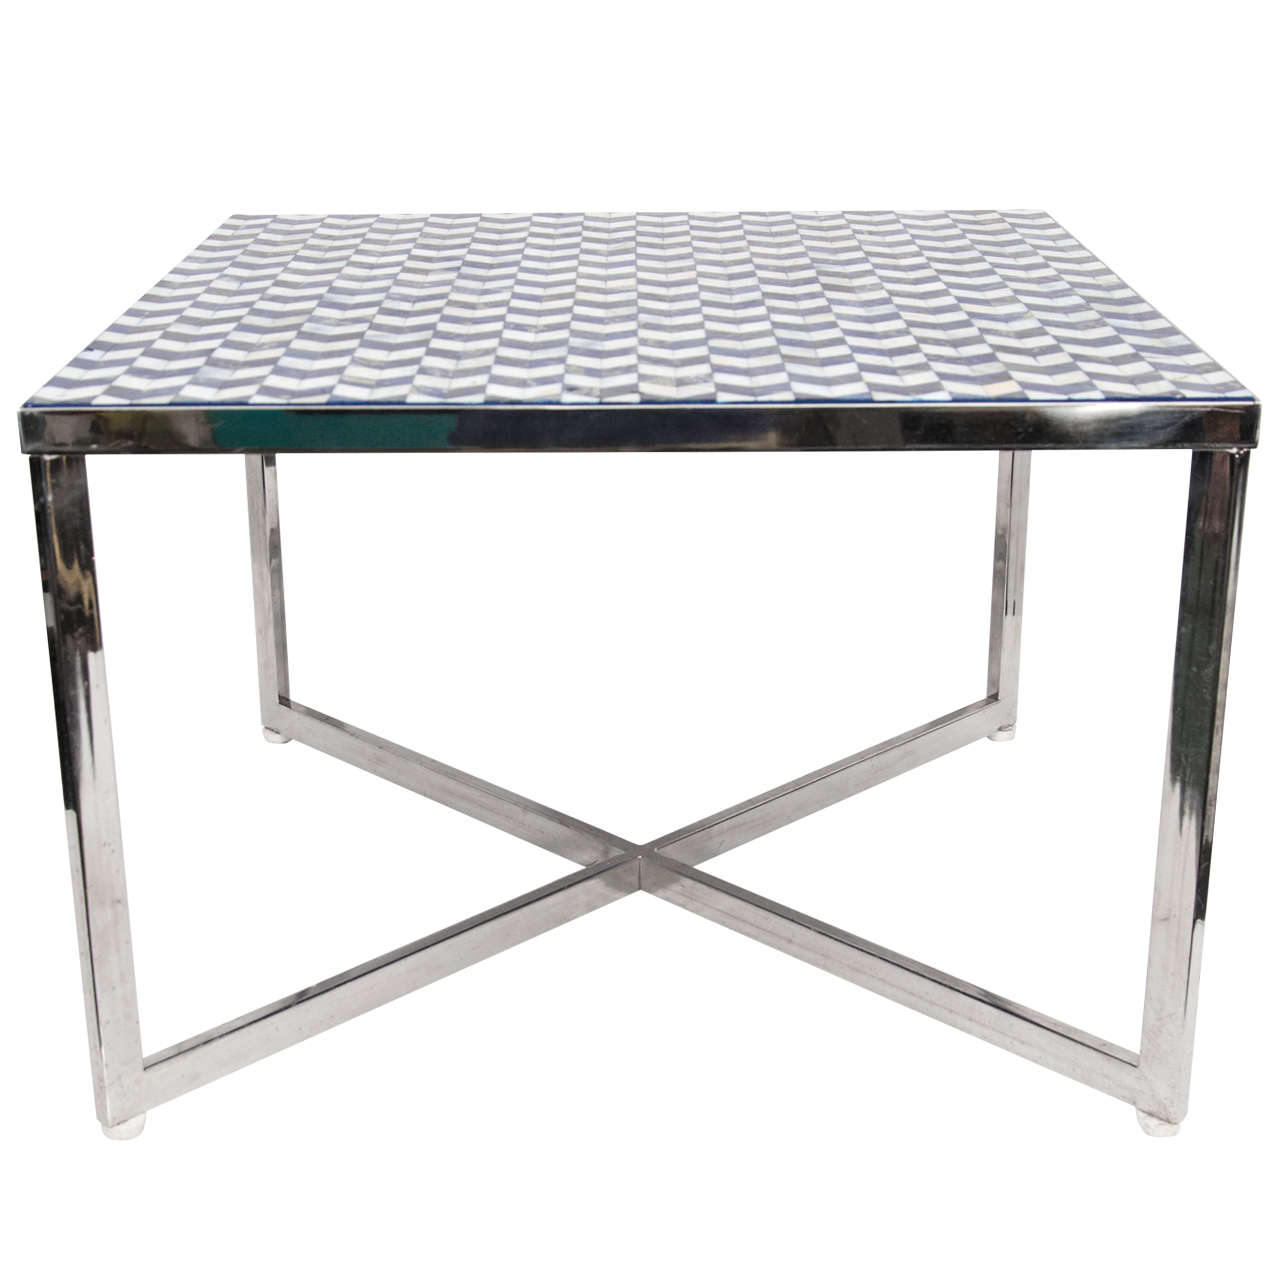 Indian Lapis Table with Chrome Legs